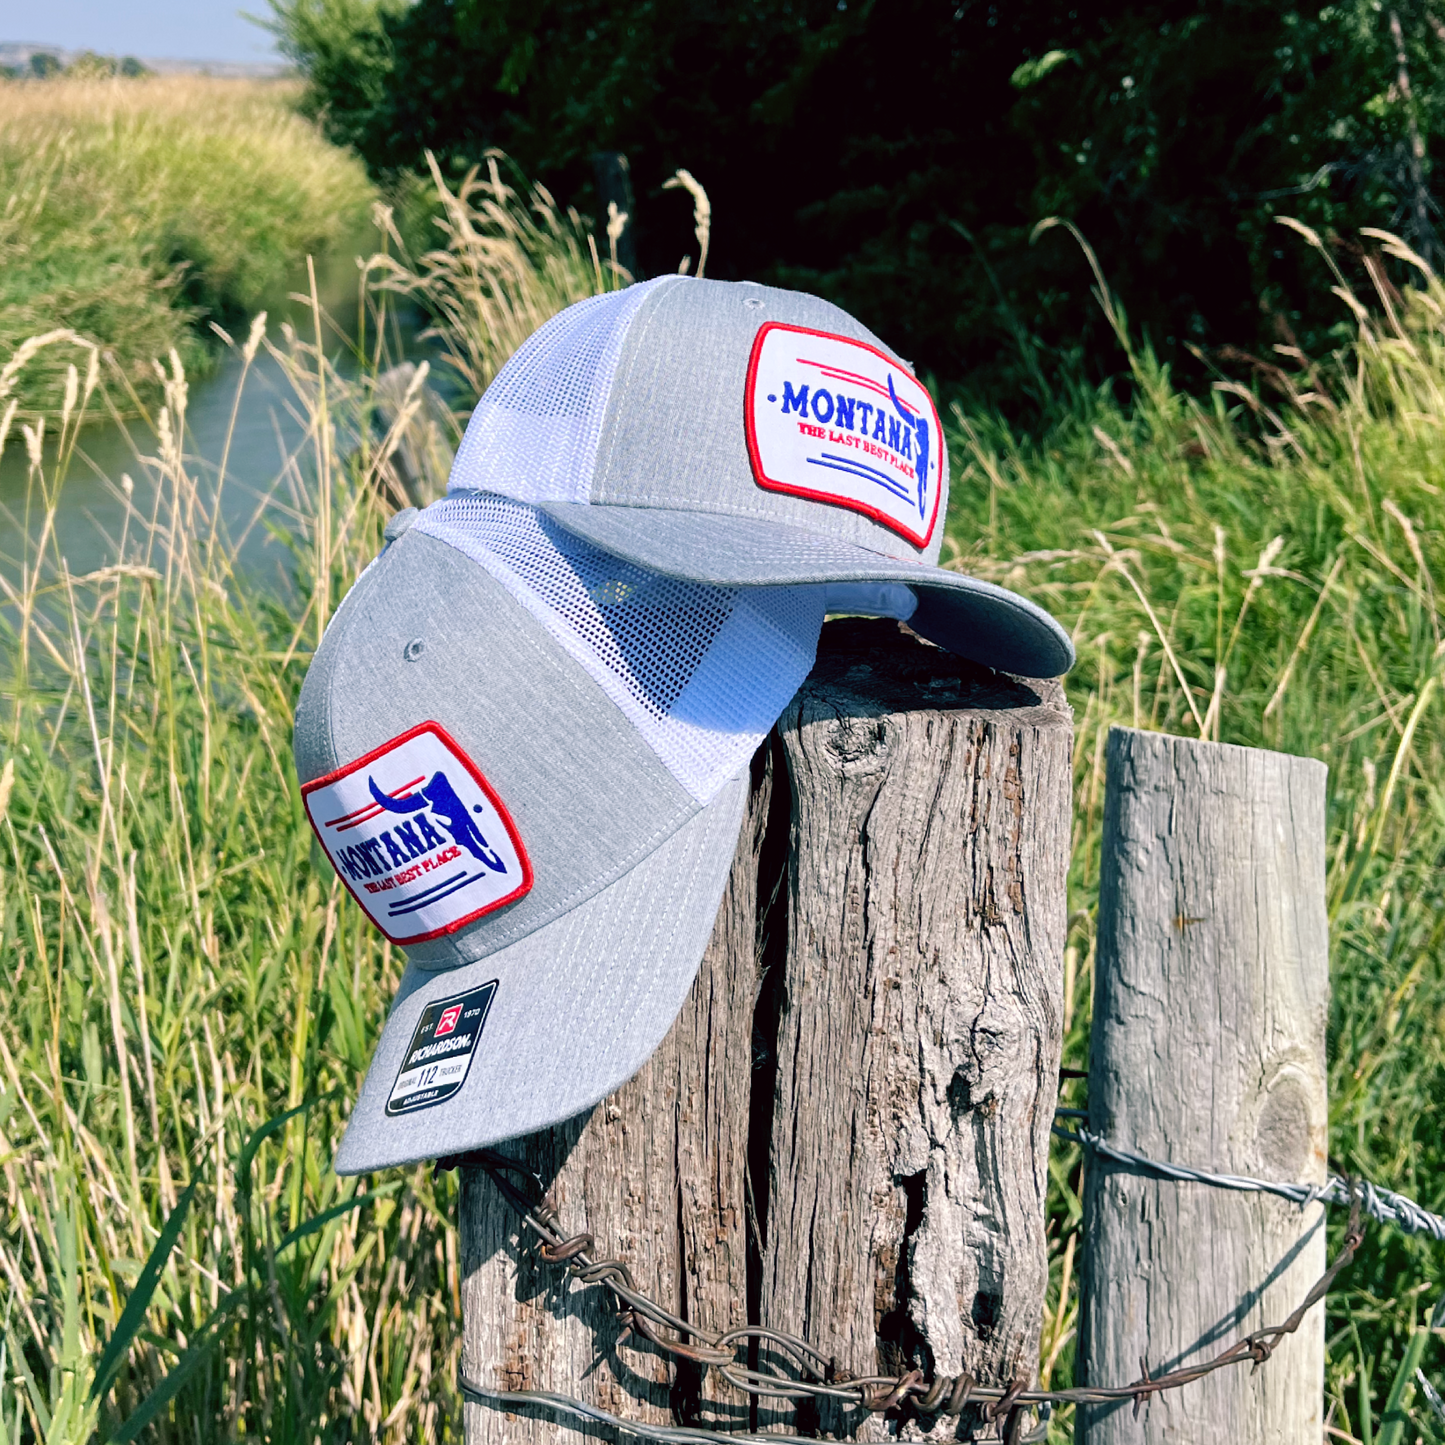 YOUTH MONTANA LAST BEST PLACE HAT -RED, WHITE, & BLUE